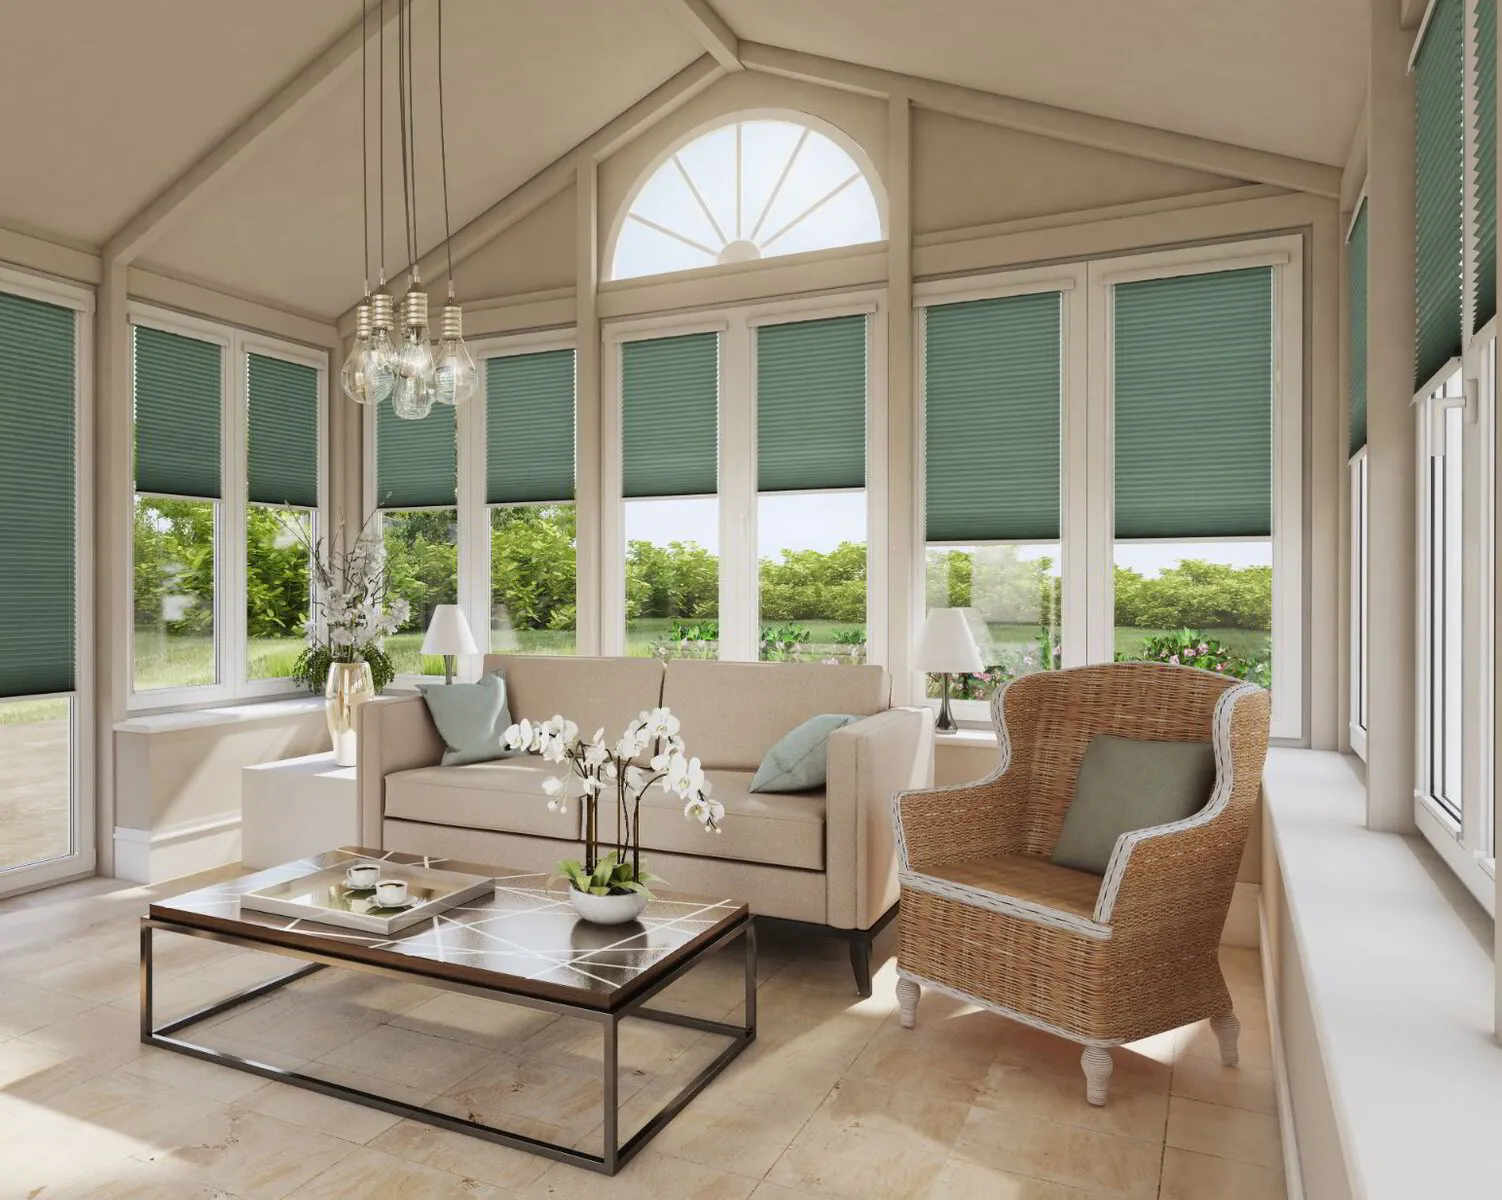 Transform Your Conservatory with the Perfect Blinds